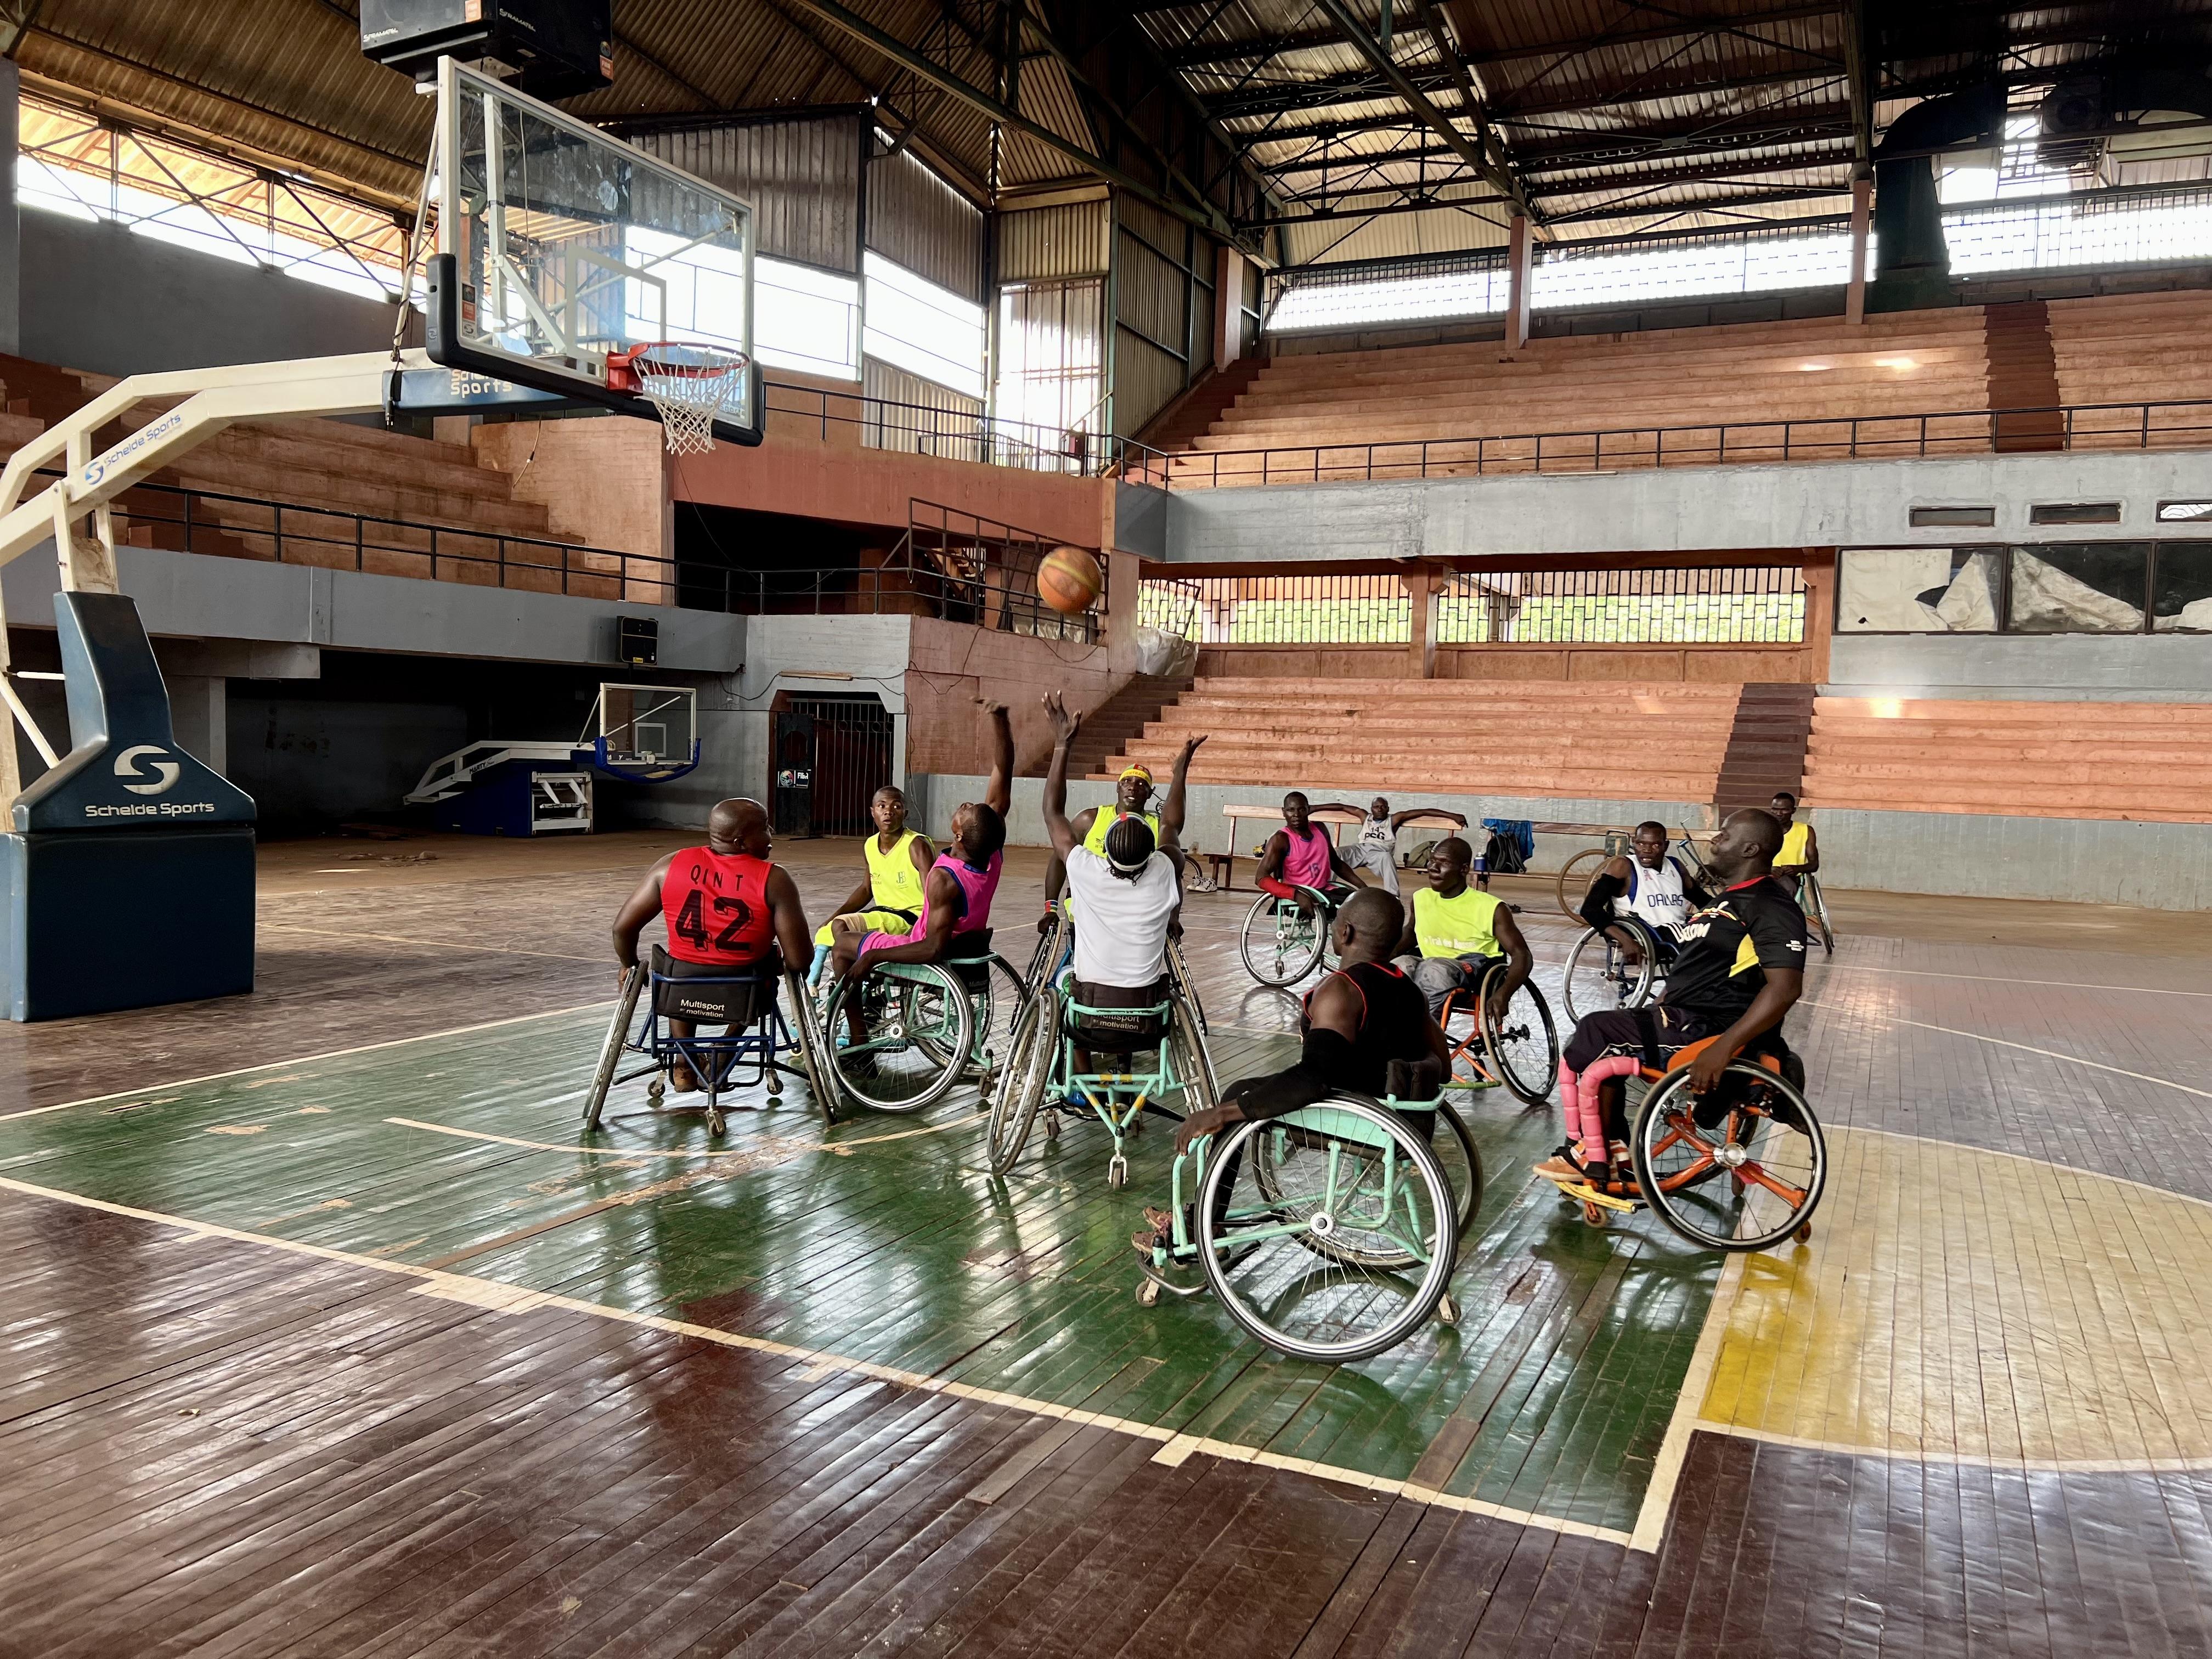 Bienvenue's story as a disabled basketball player